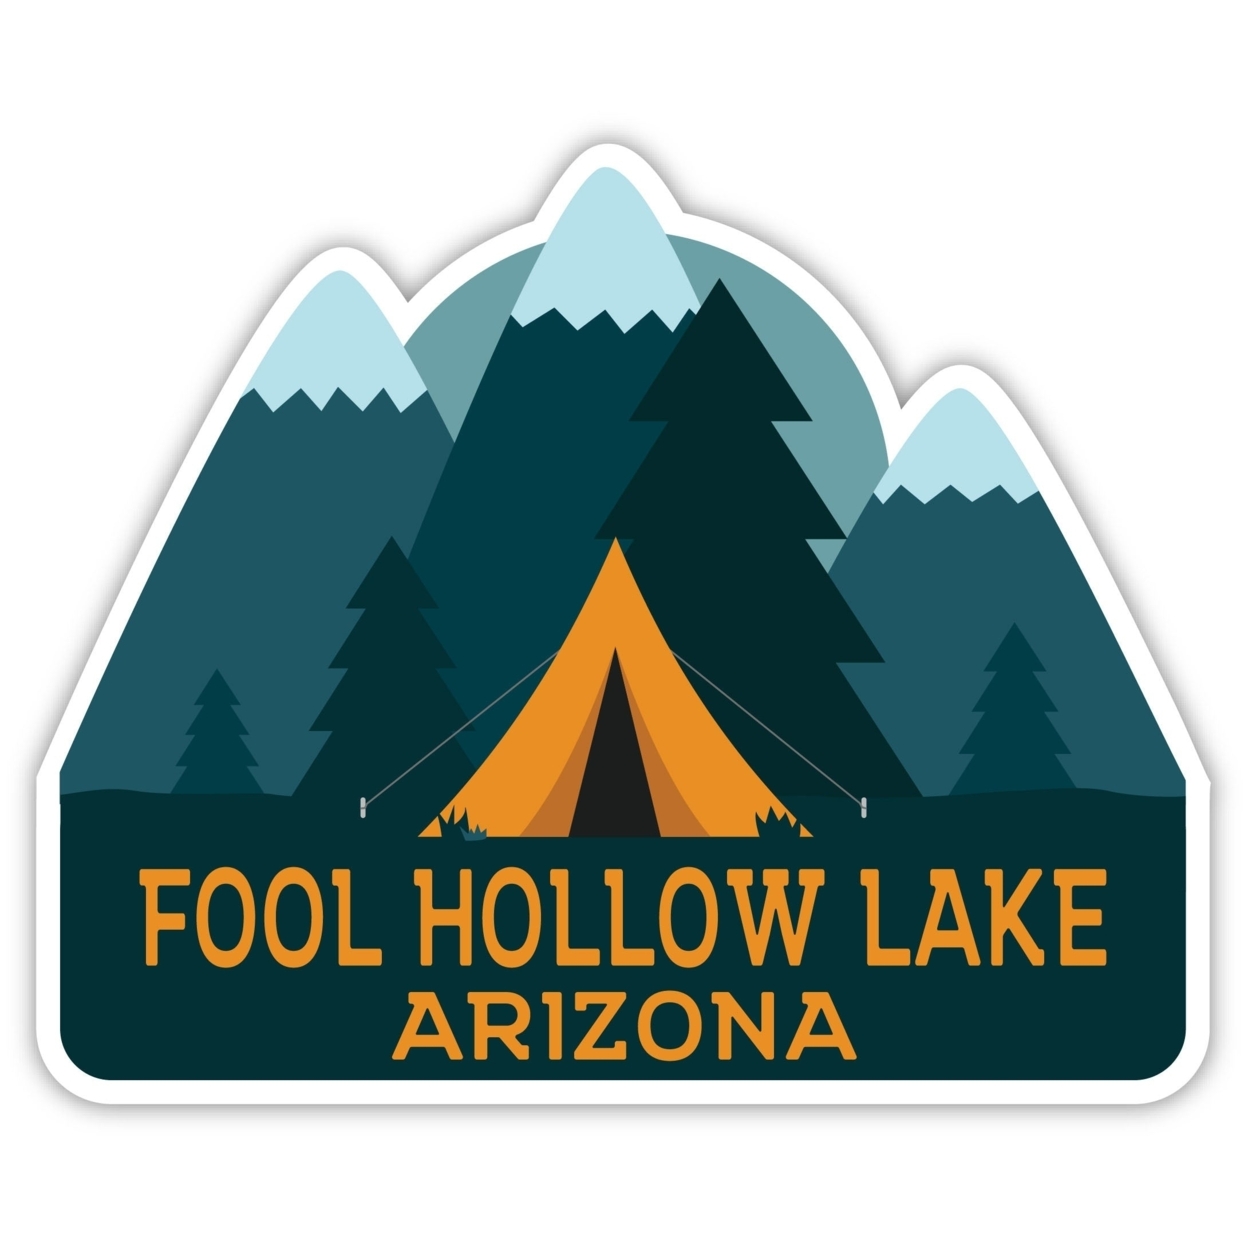 Fool Hollow Lake Arizona Souvenir Decorative Stickers (Choose Theme And Size) - Single Unit, 2-Inch, Great Outdoors